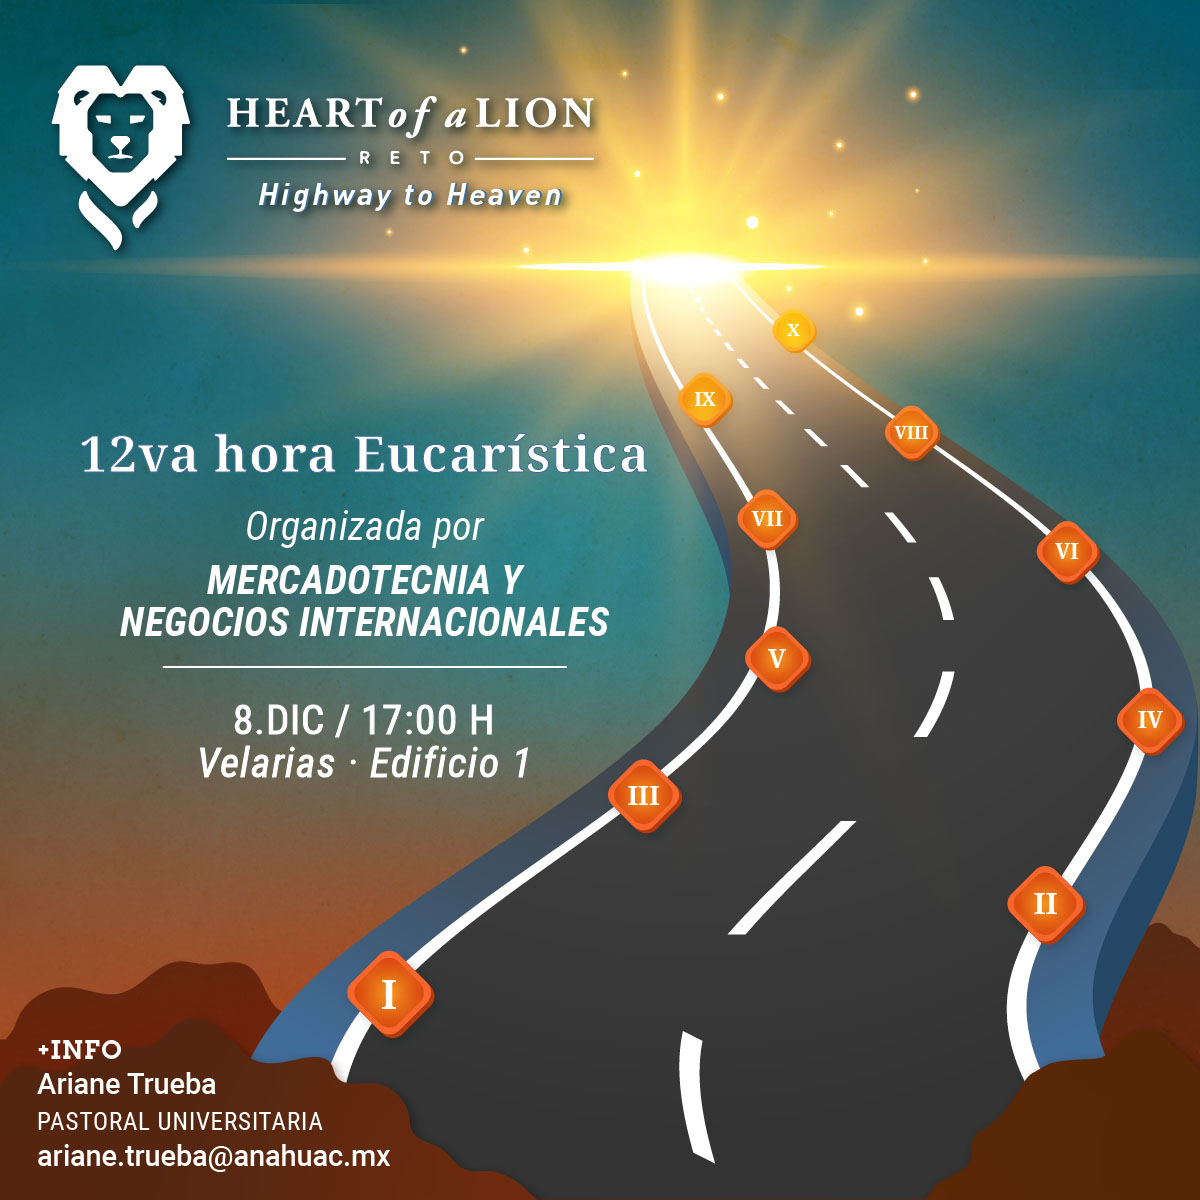 Reto Heart of a Lion: Highway to Heaven